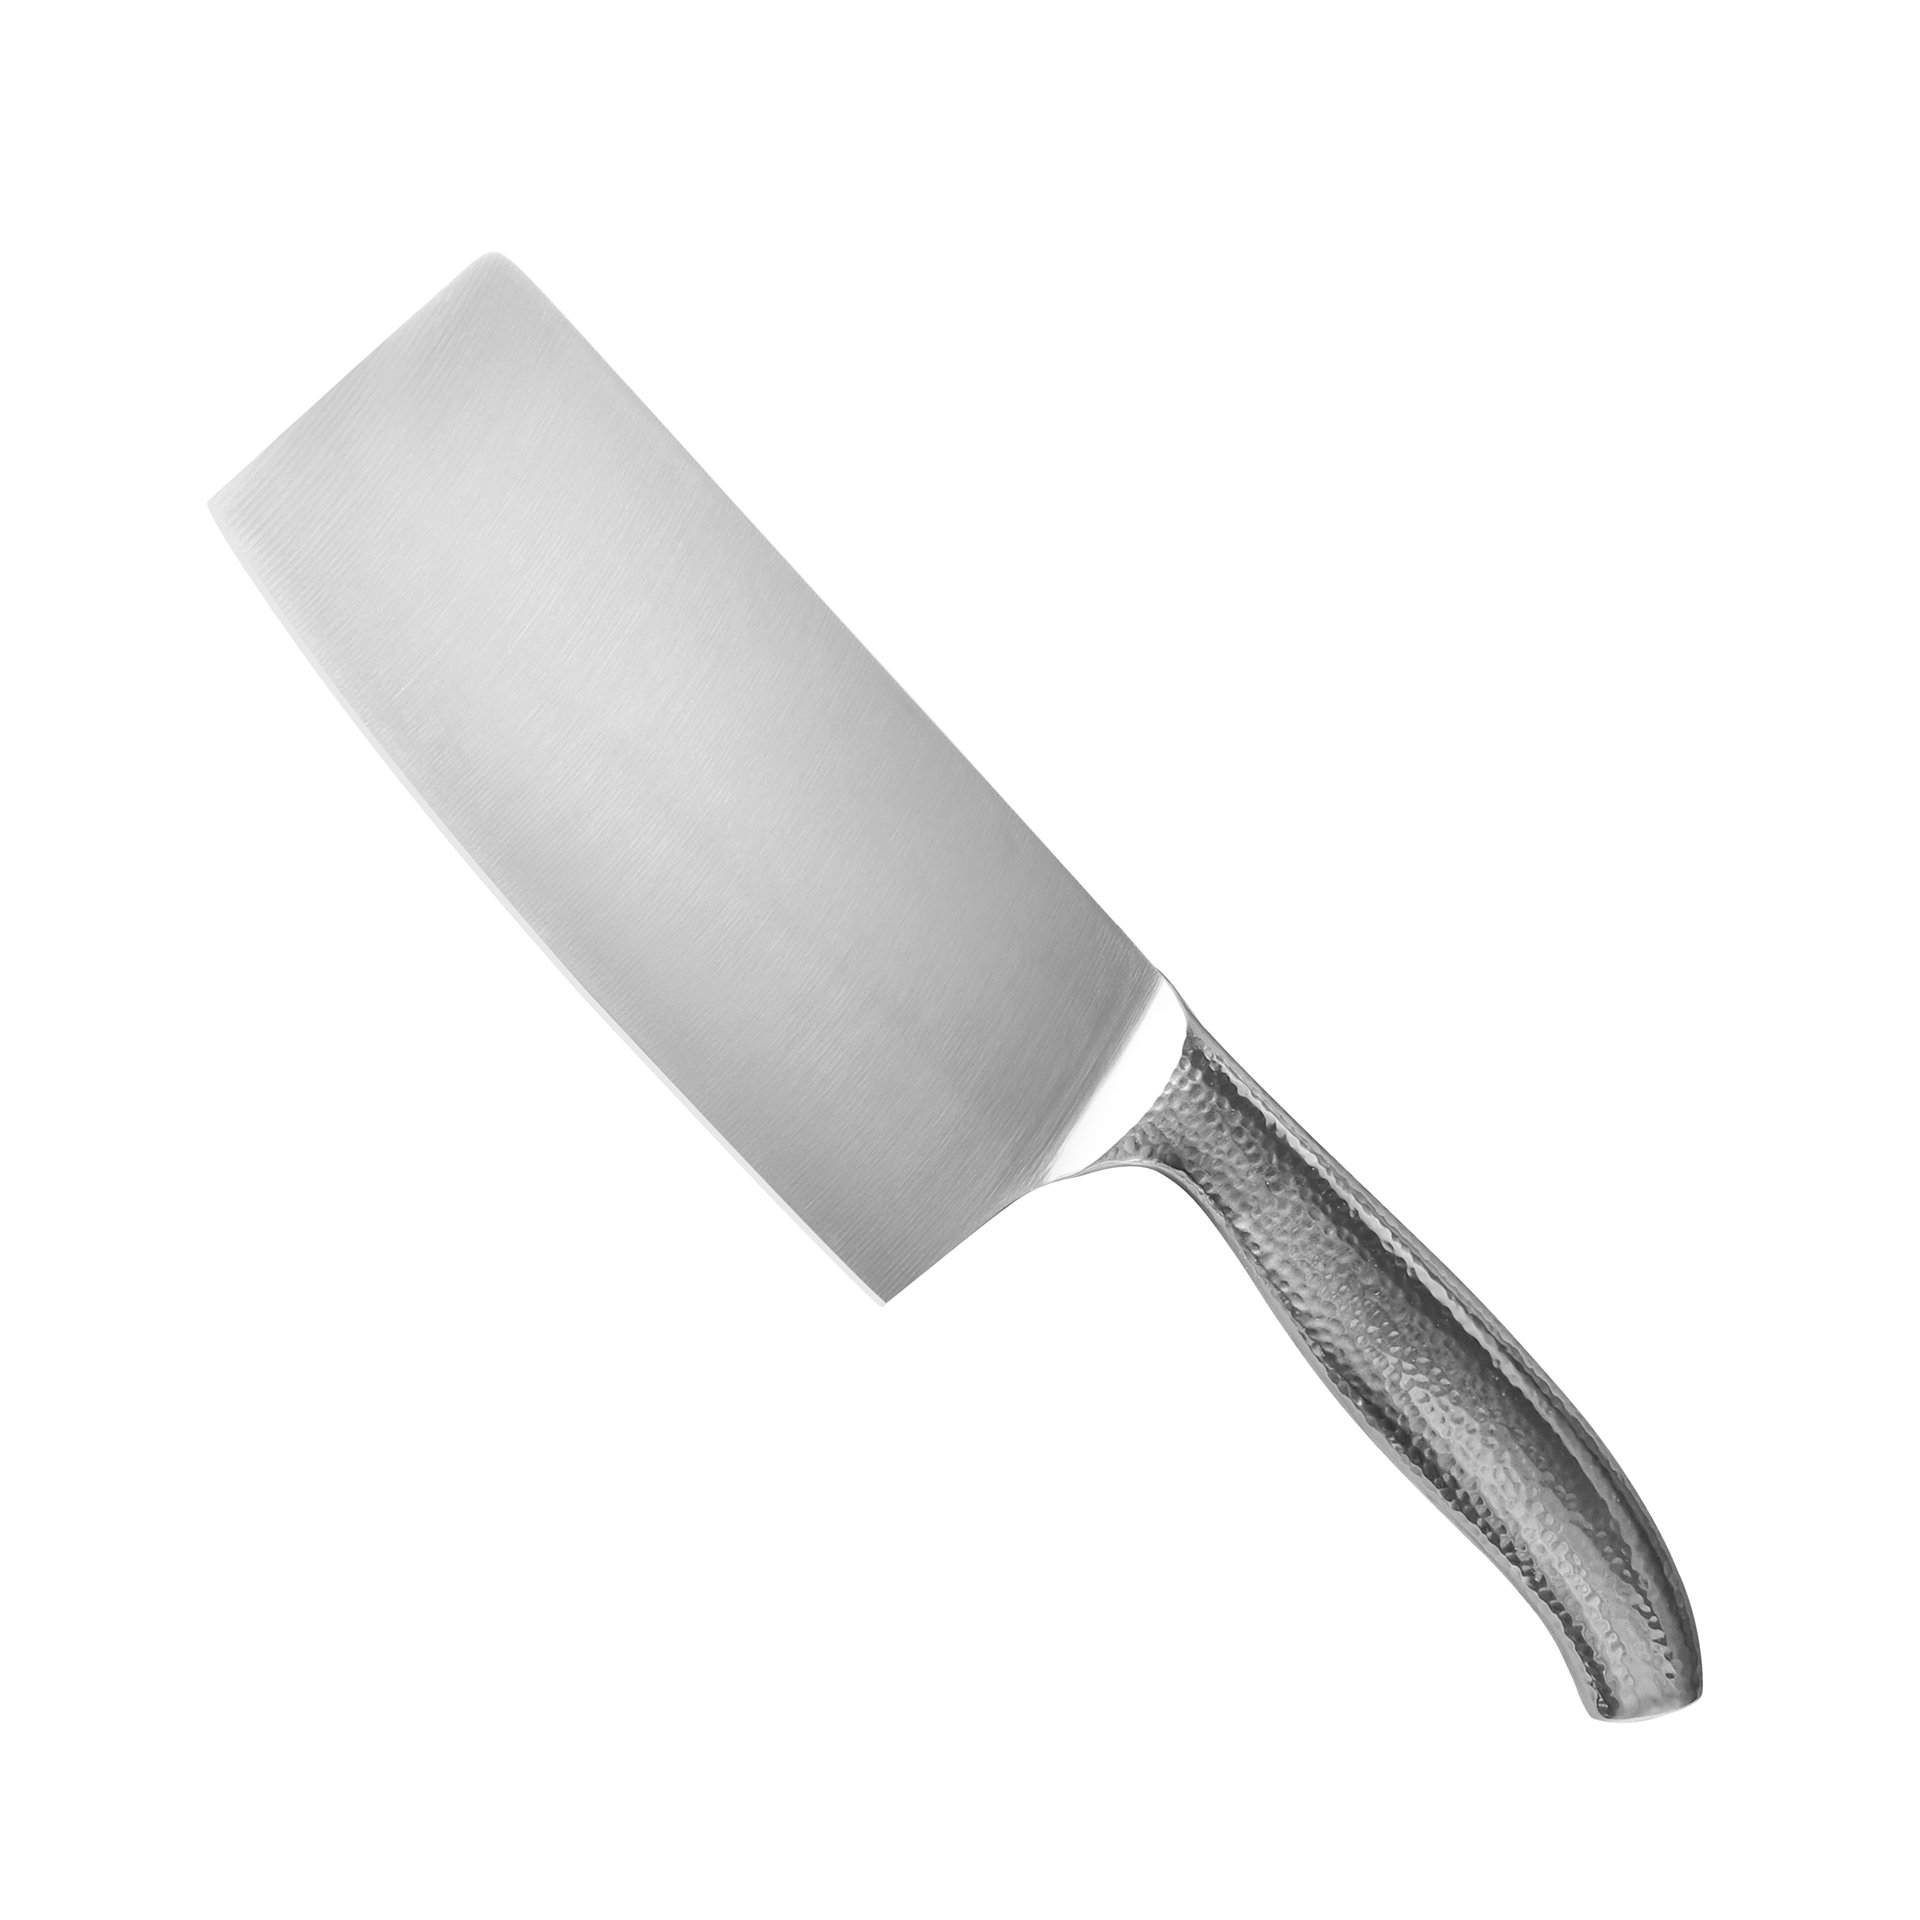 Cleaver knife BH7367